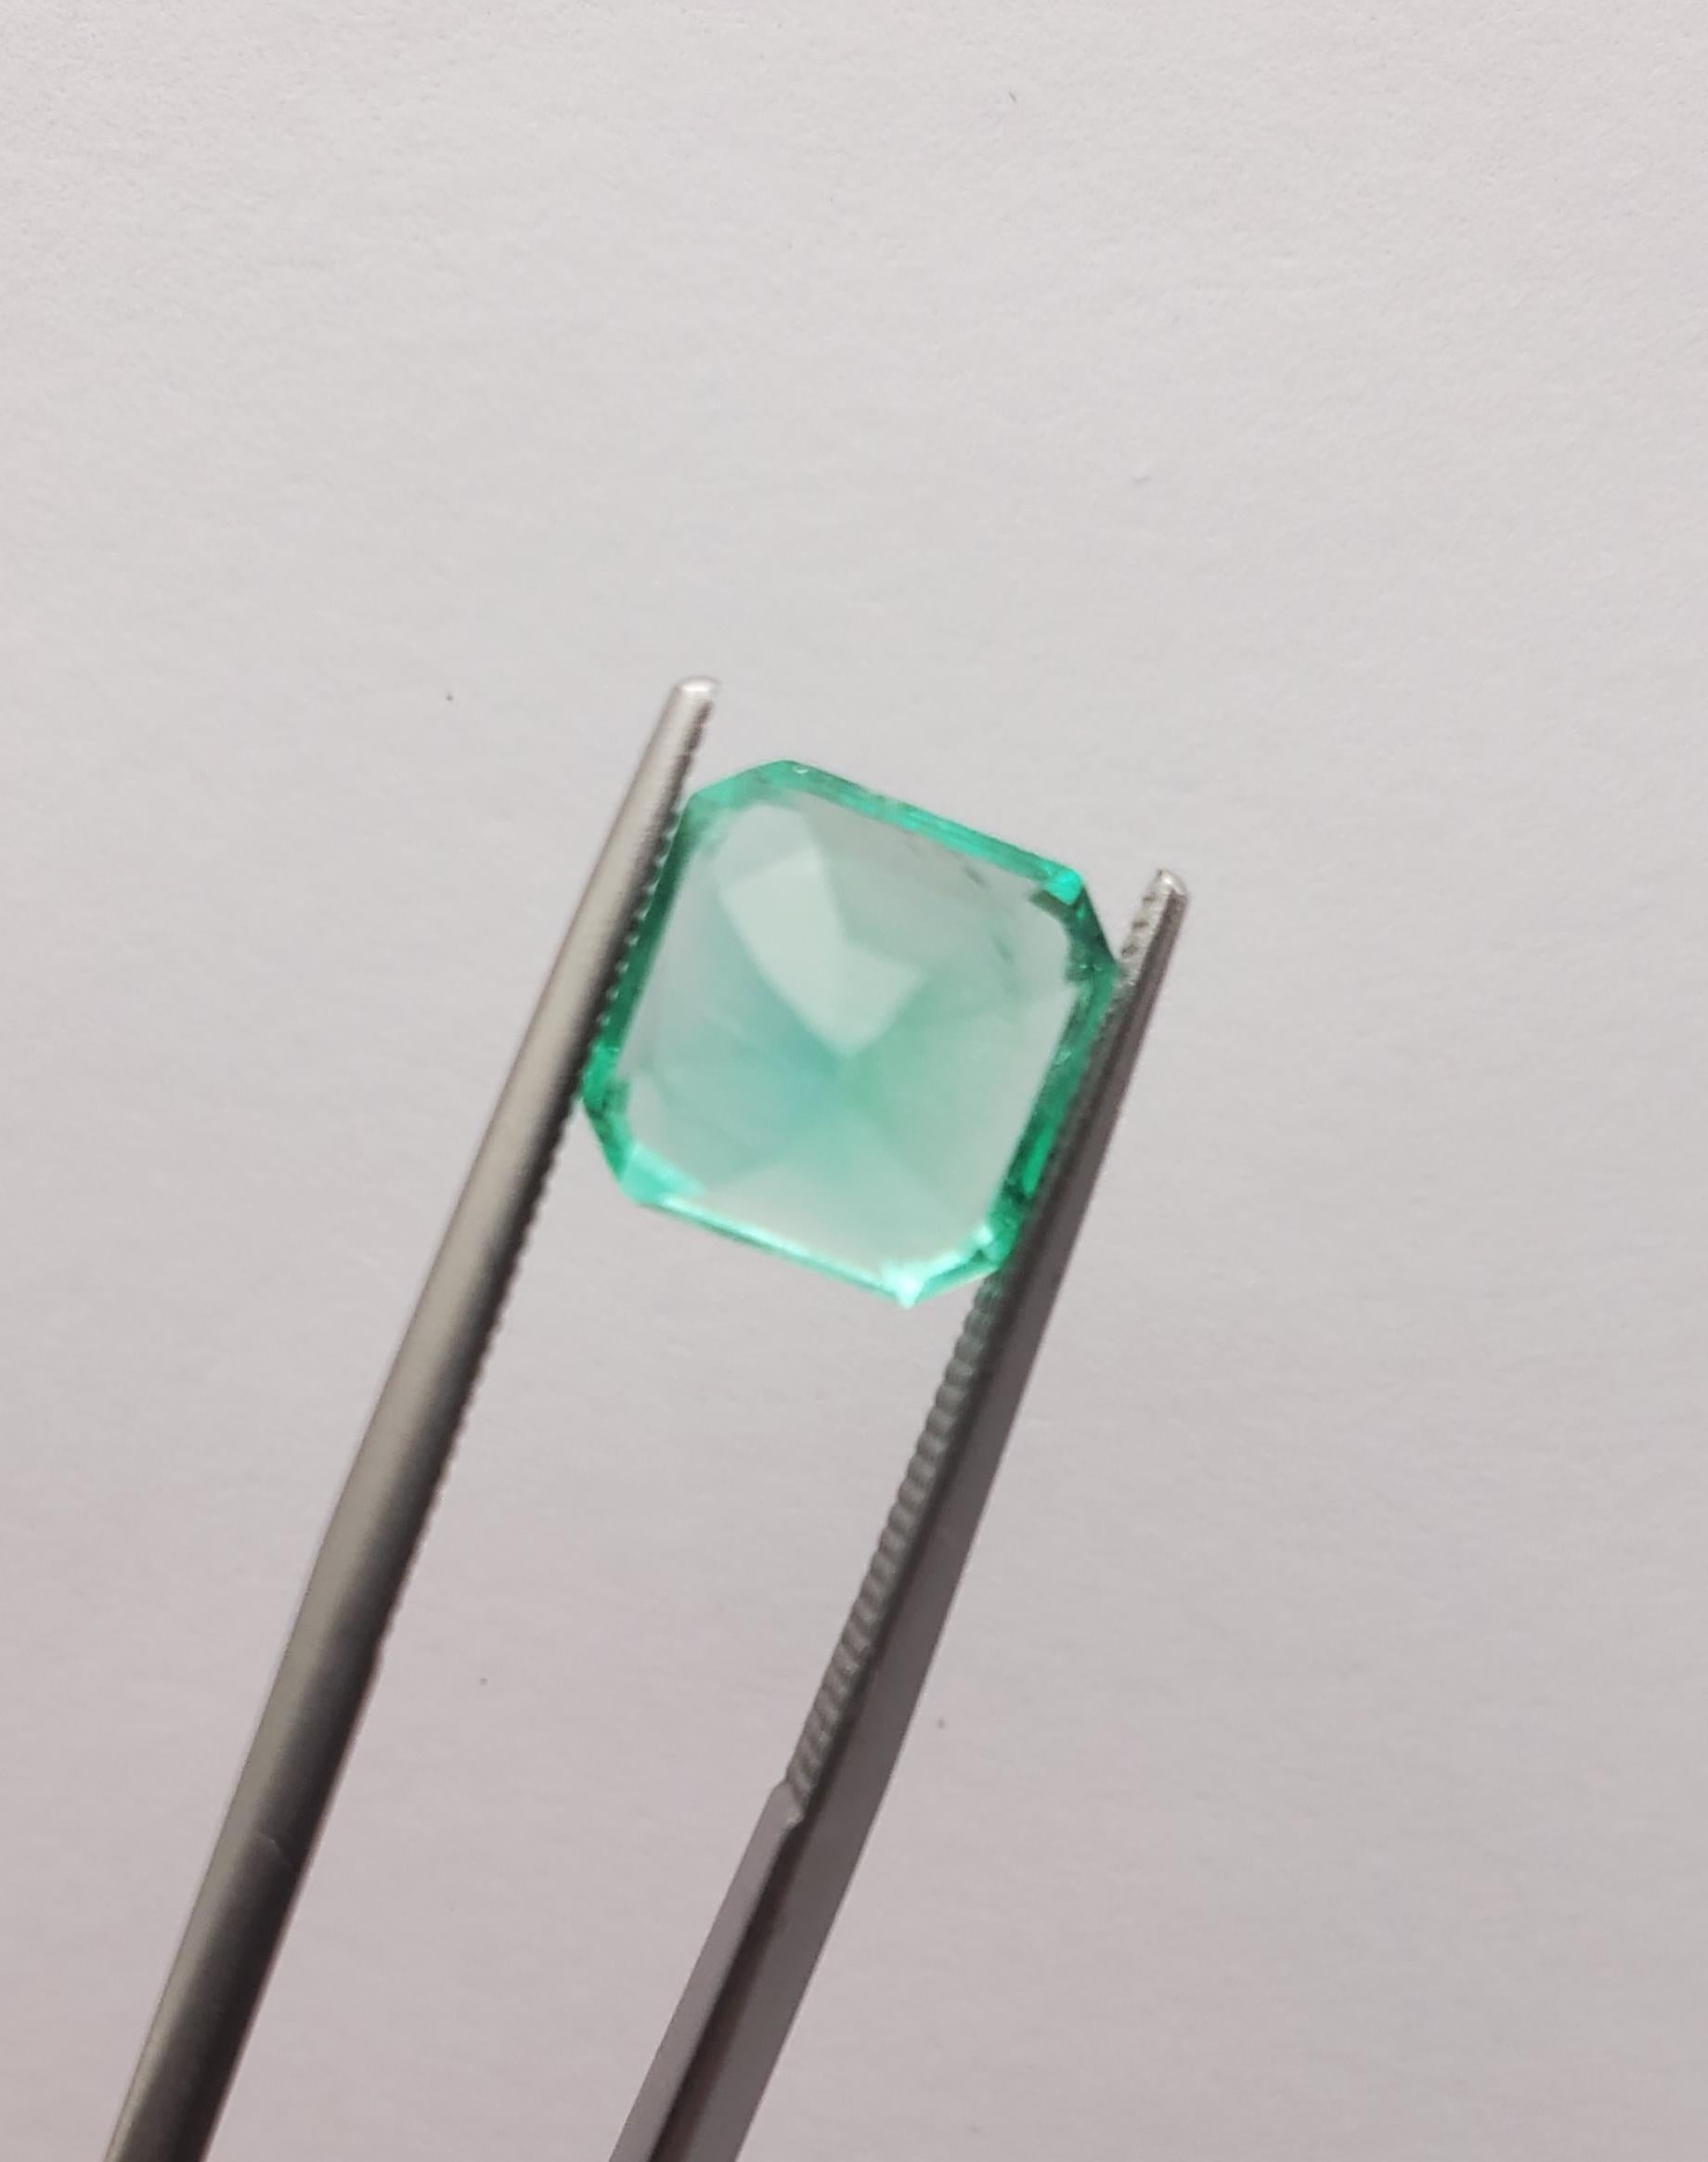 Showstopping 2.93ct Octagonal Cut Natural Emerald GIA Certified 1